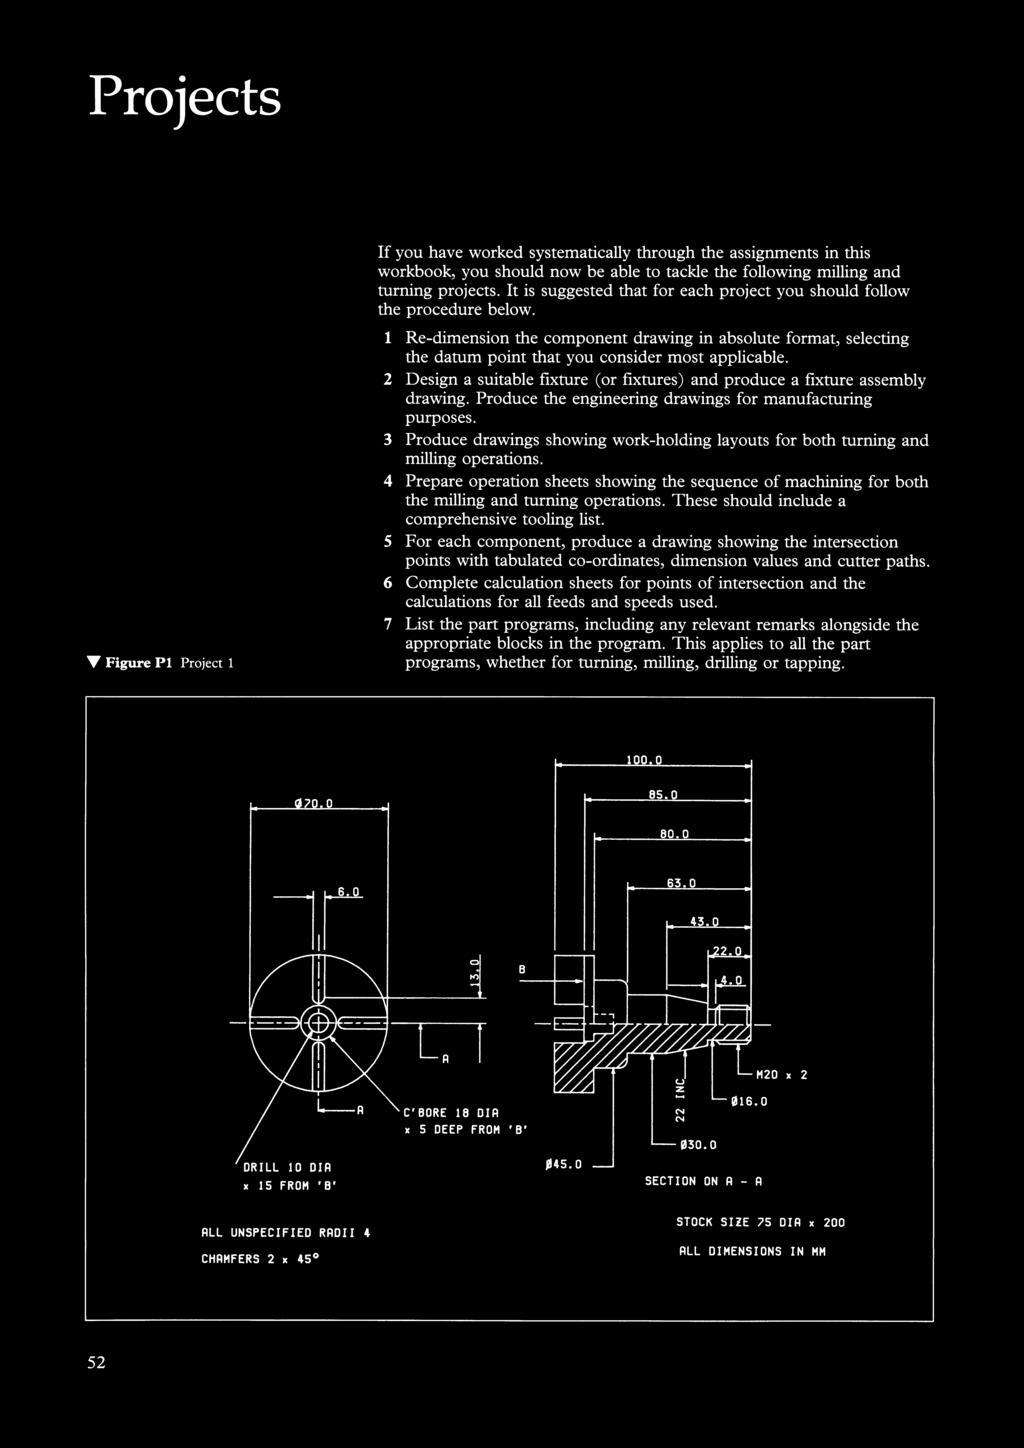 Projects ~ Figure Pl Project 1 If you have worked systematically through the assignments in this workbook, you should now be able to tackle the following milling and turning projects.